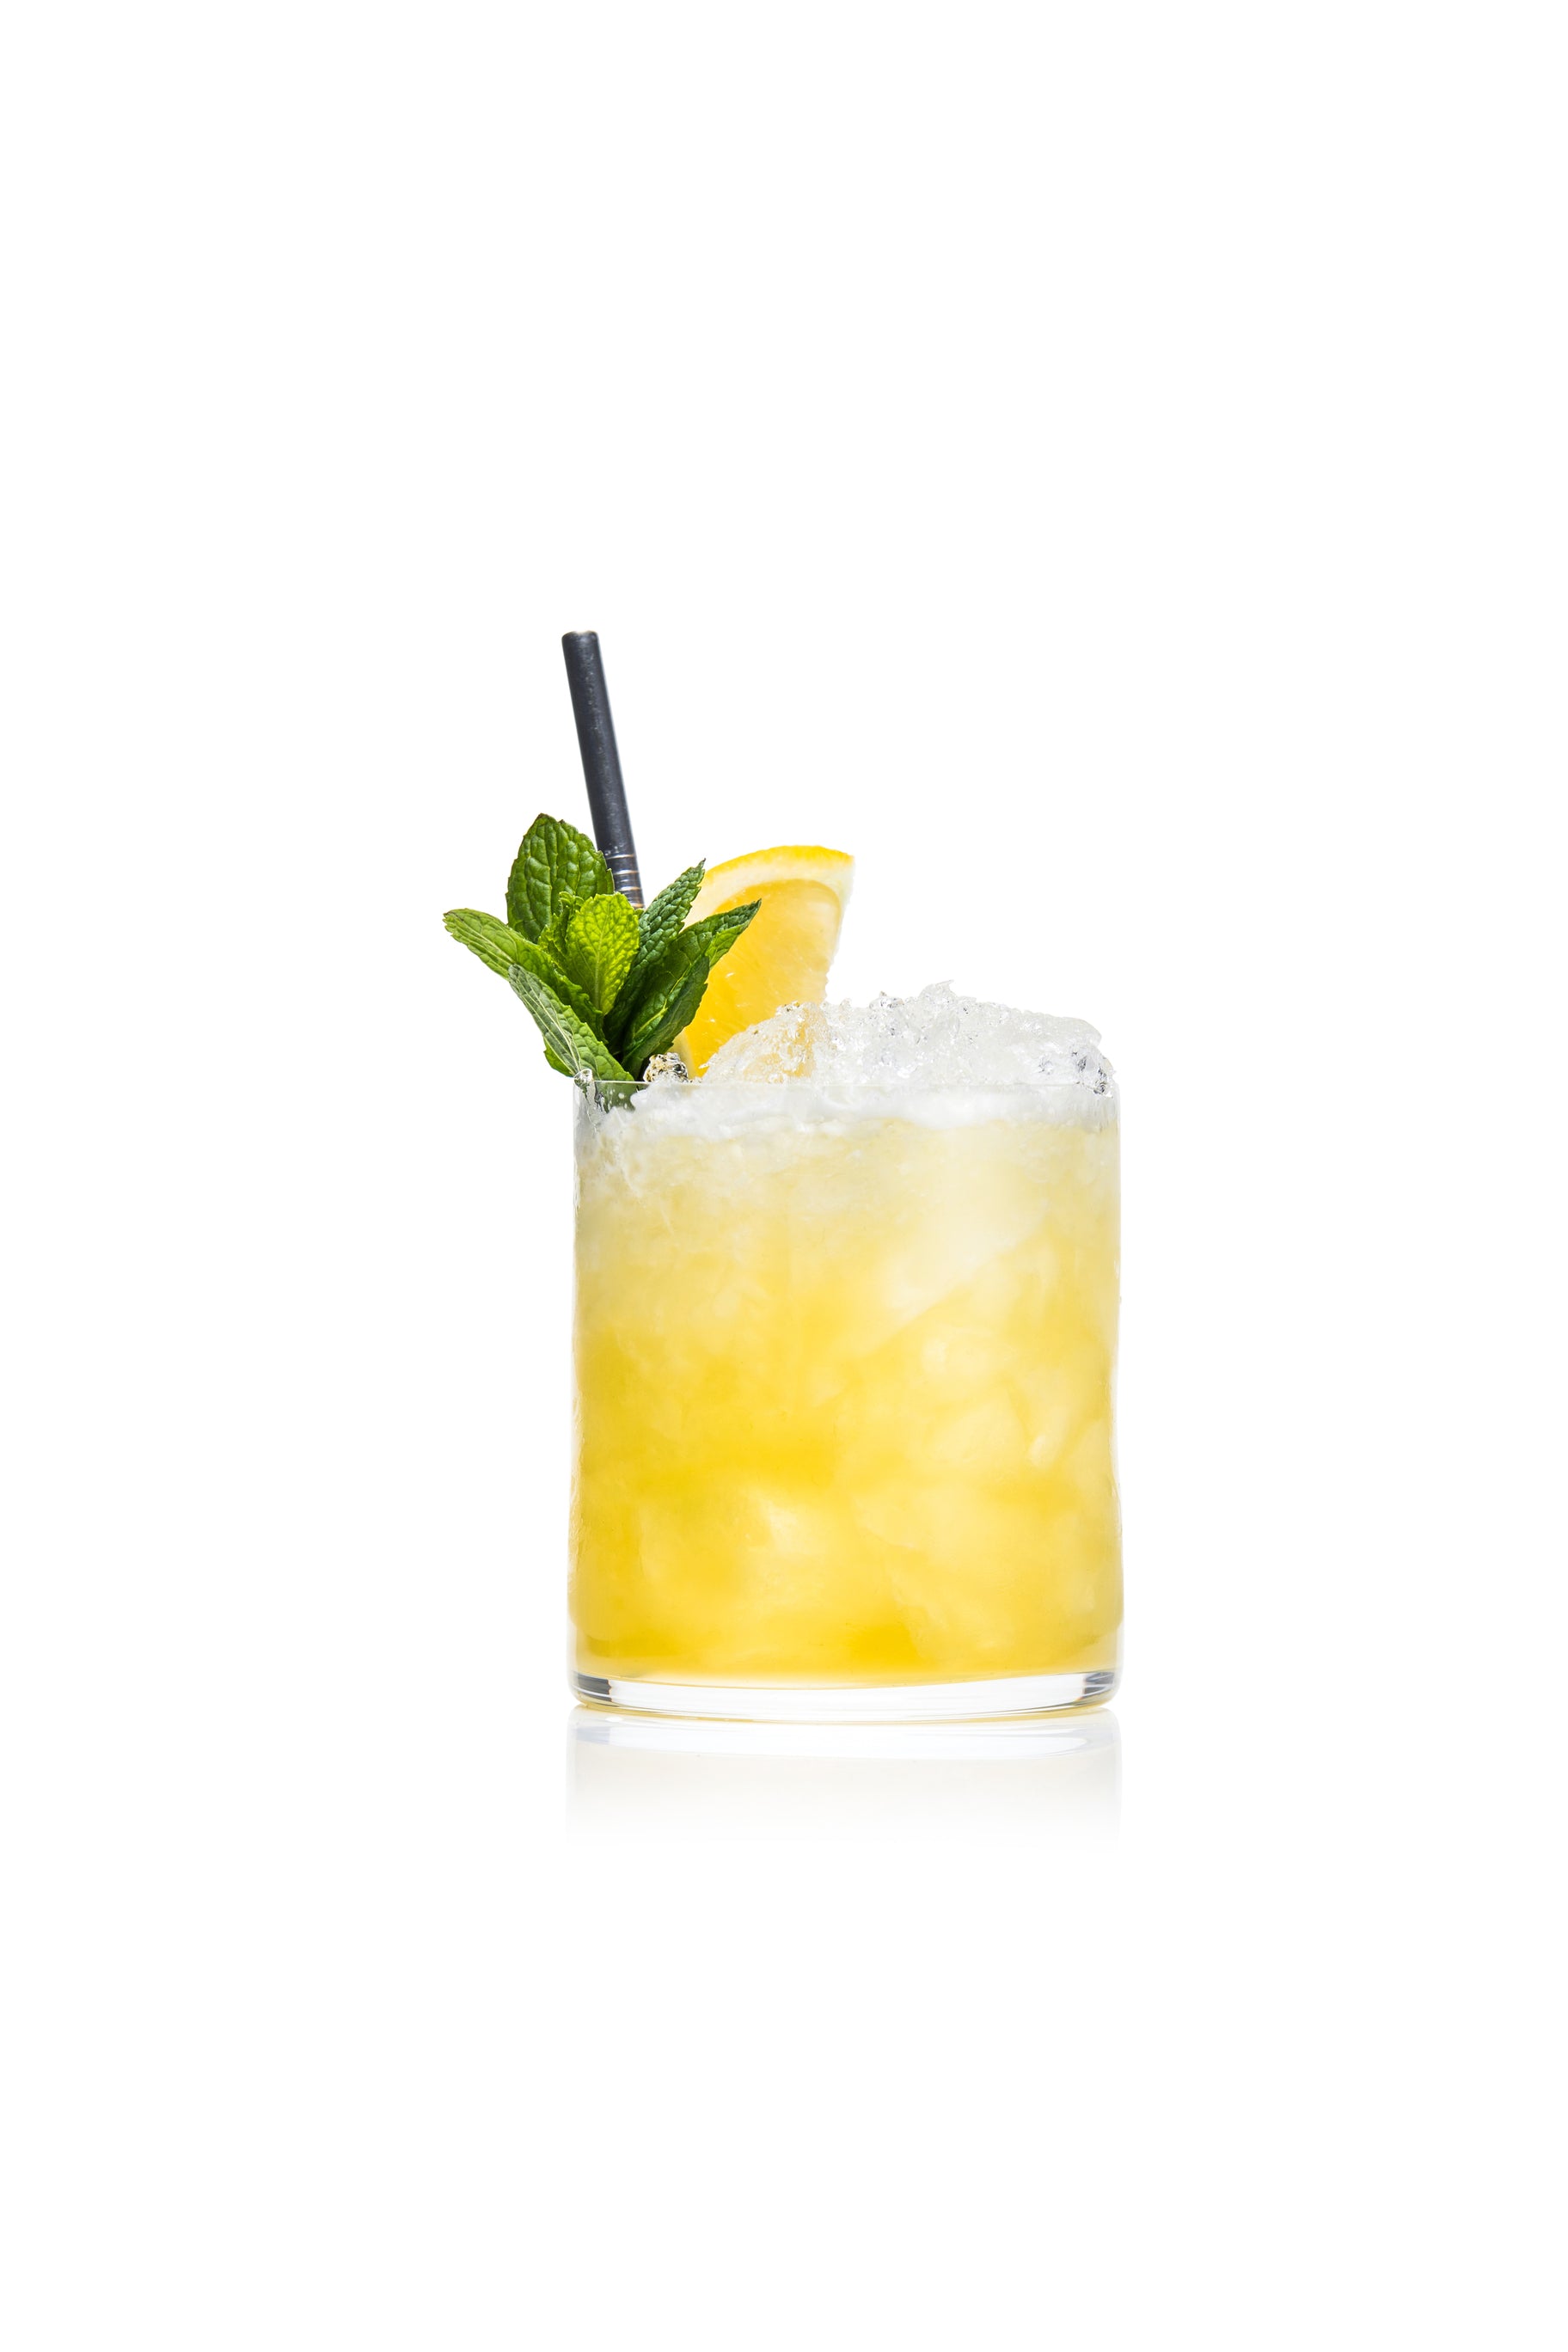 Whisky Smash with pineapple from Starward Whisky